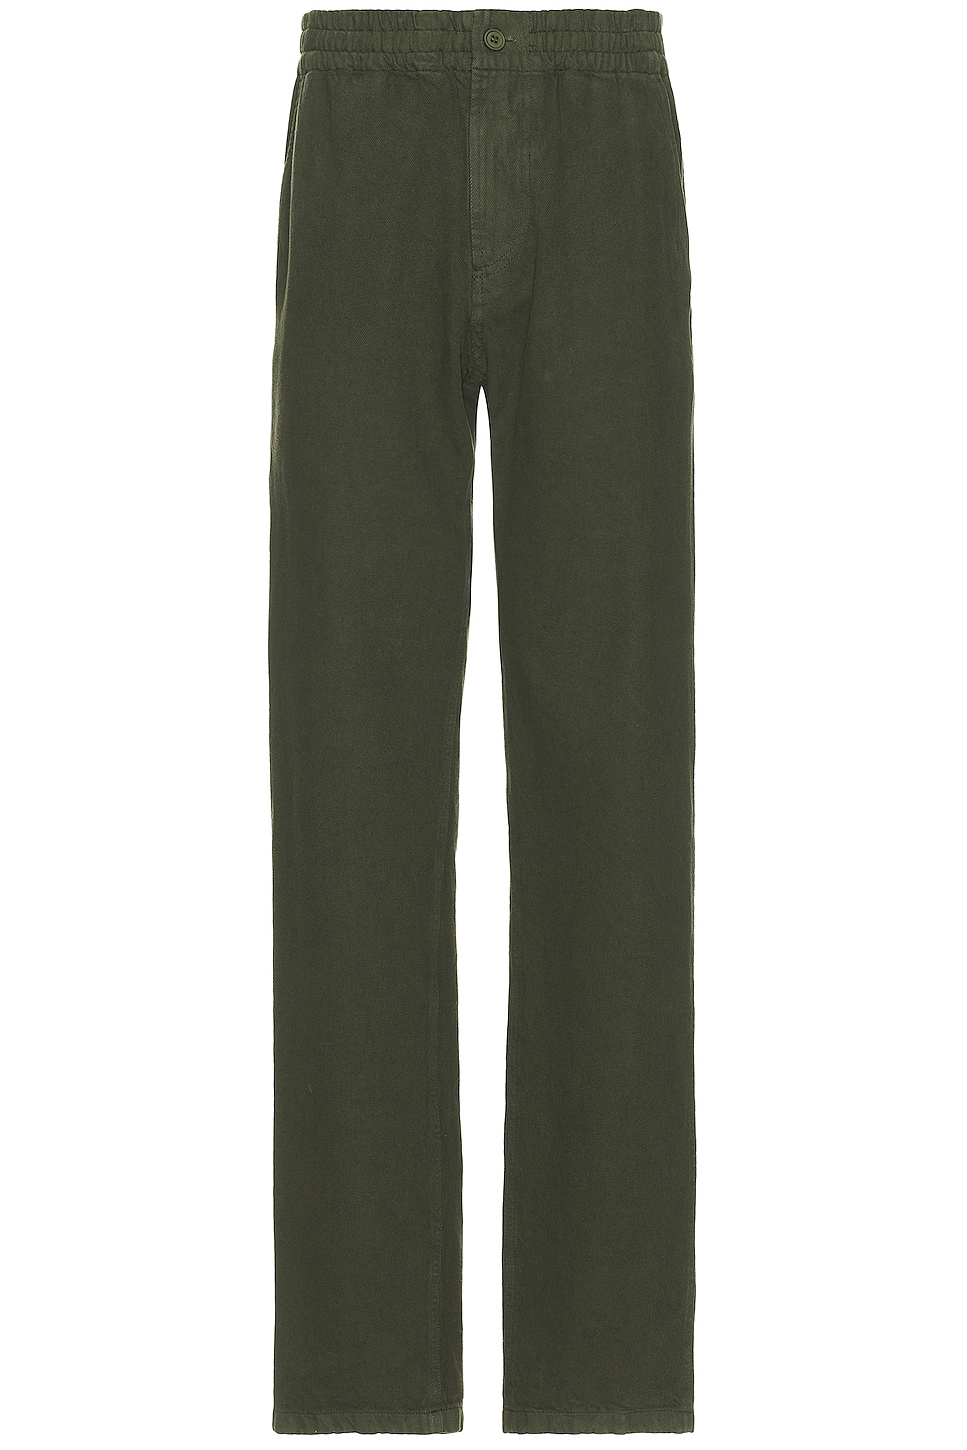 Image 1 of A.P.C. Chuck Pant in Green